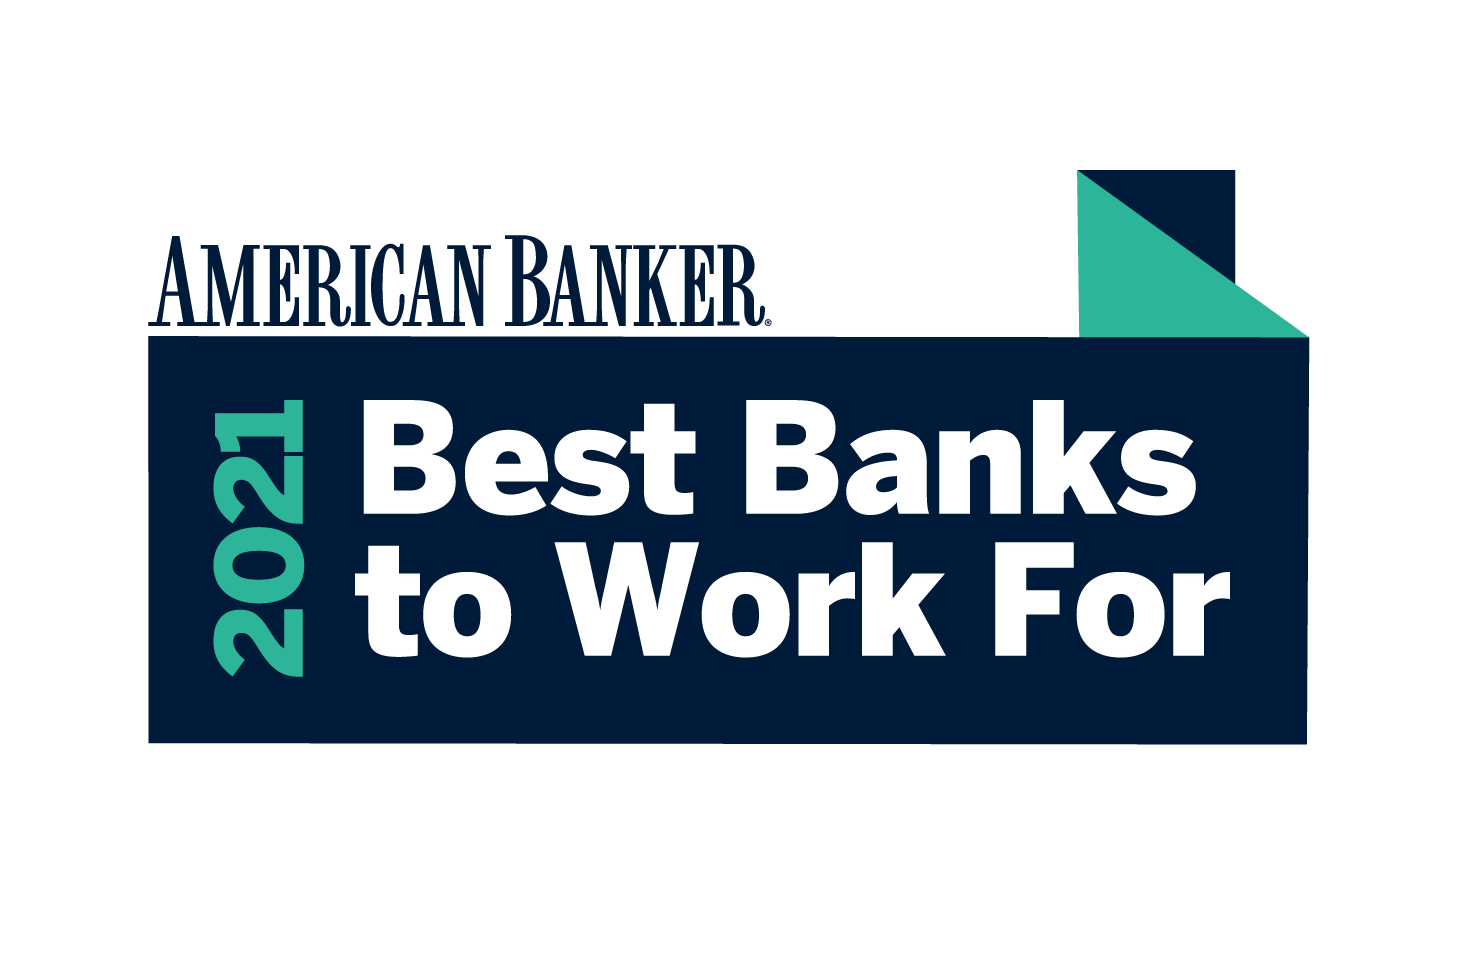 American Banker - 2020 Best Banks to Work For